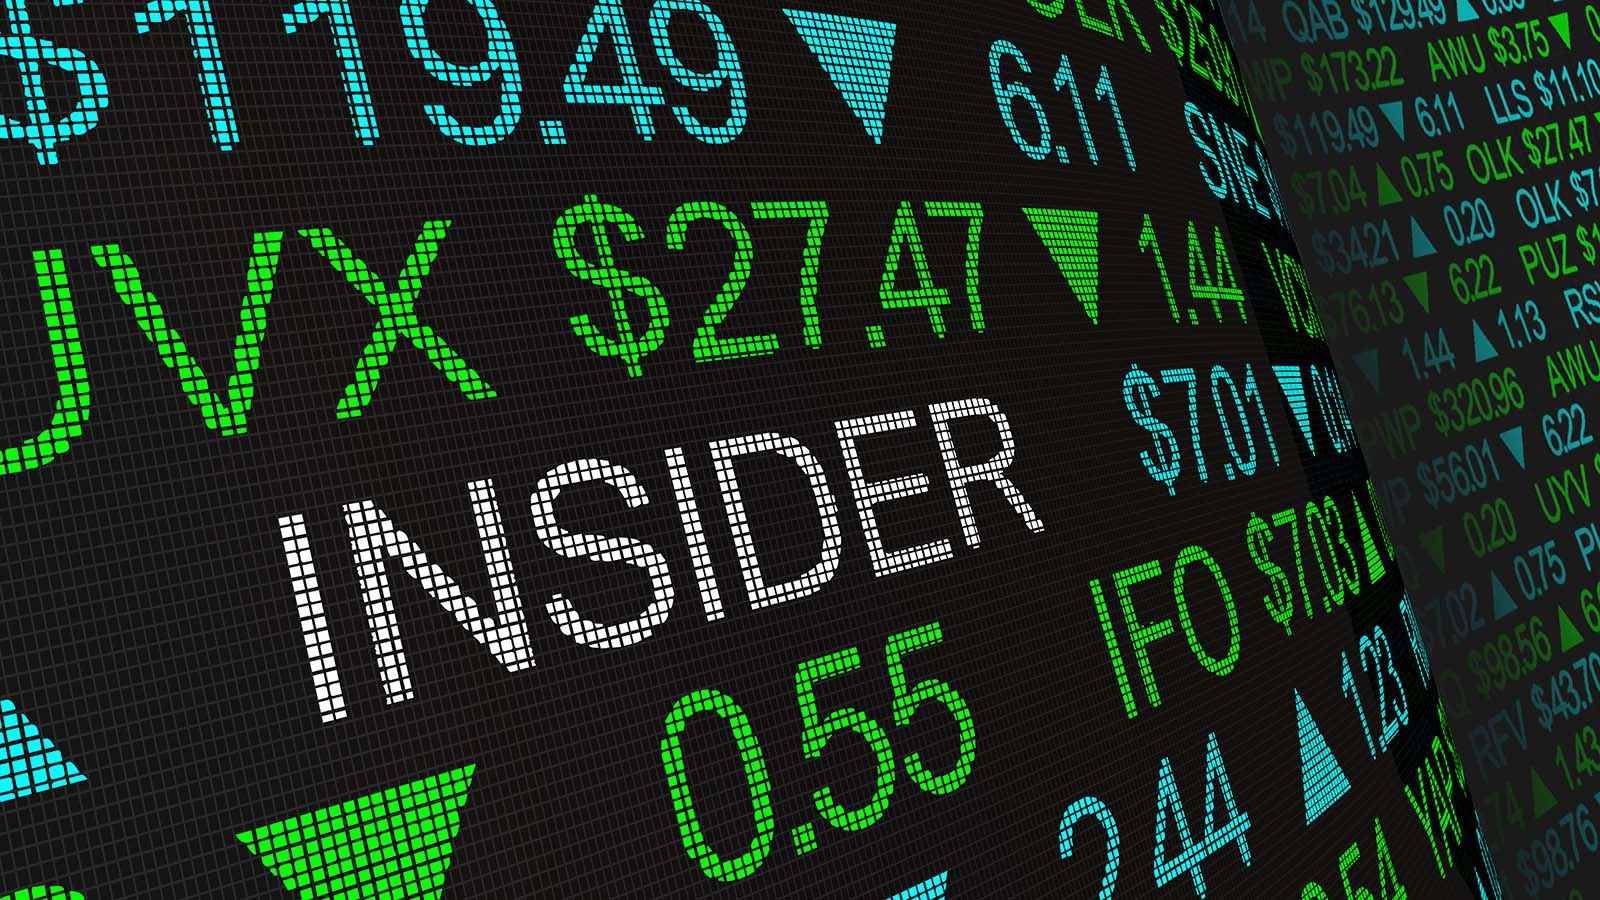 The word "INSIDER" displayed in a blue and green ticker tape.